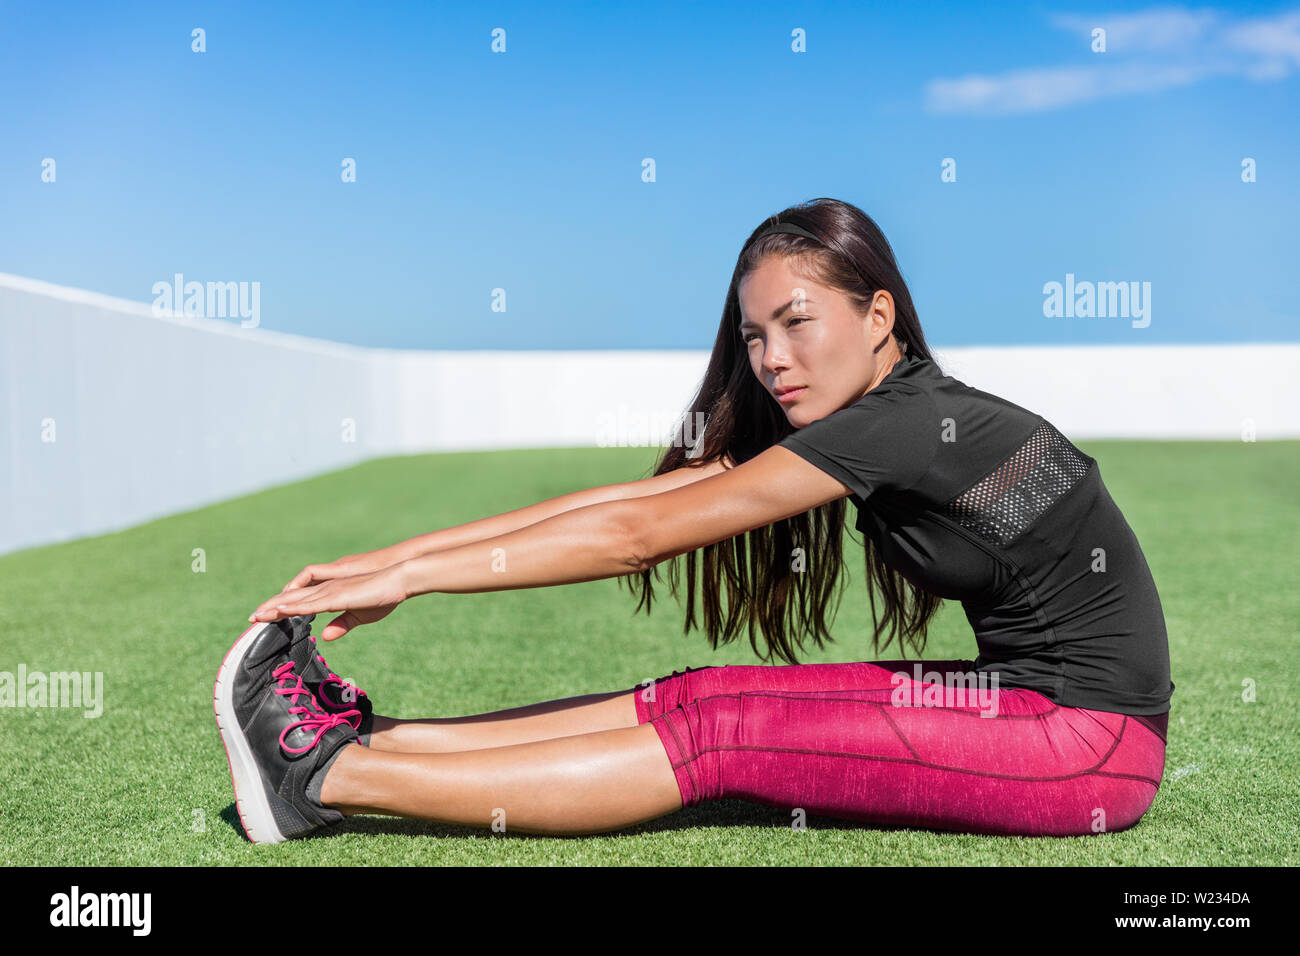 Fitness woman stretching hamstring leg muscles - back stretch sitting toe touch stretches. Seated forward bend. Sporty young athlete in activewear exercising flexibility on grass in sunny outdoor gym. Stock Photo